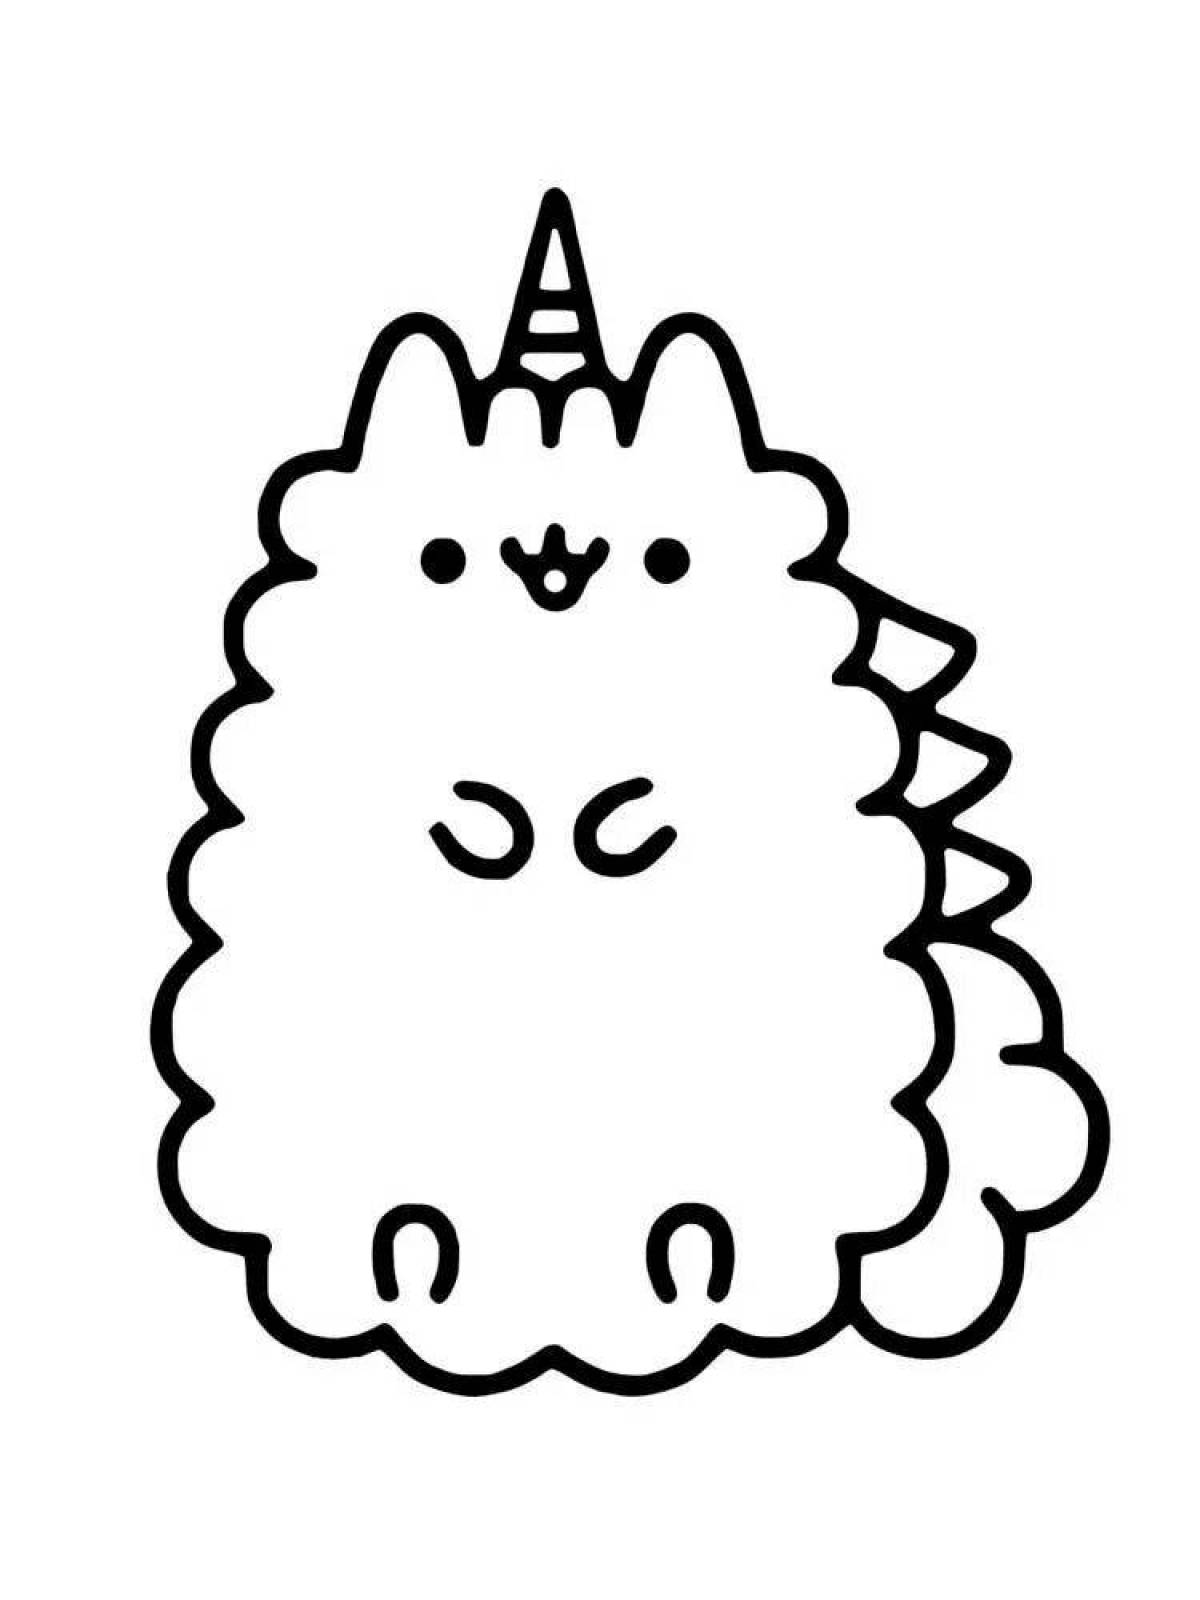 Cute and fluffy cat coloring page